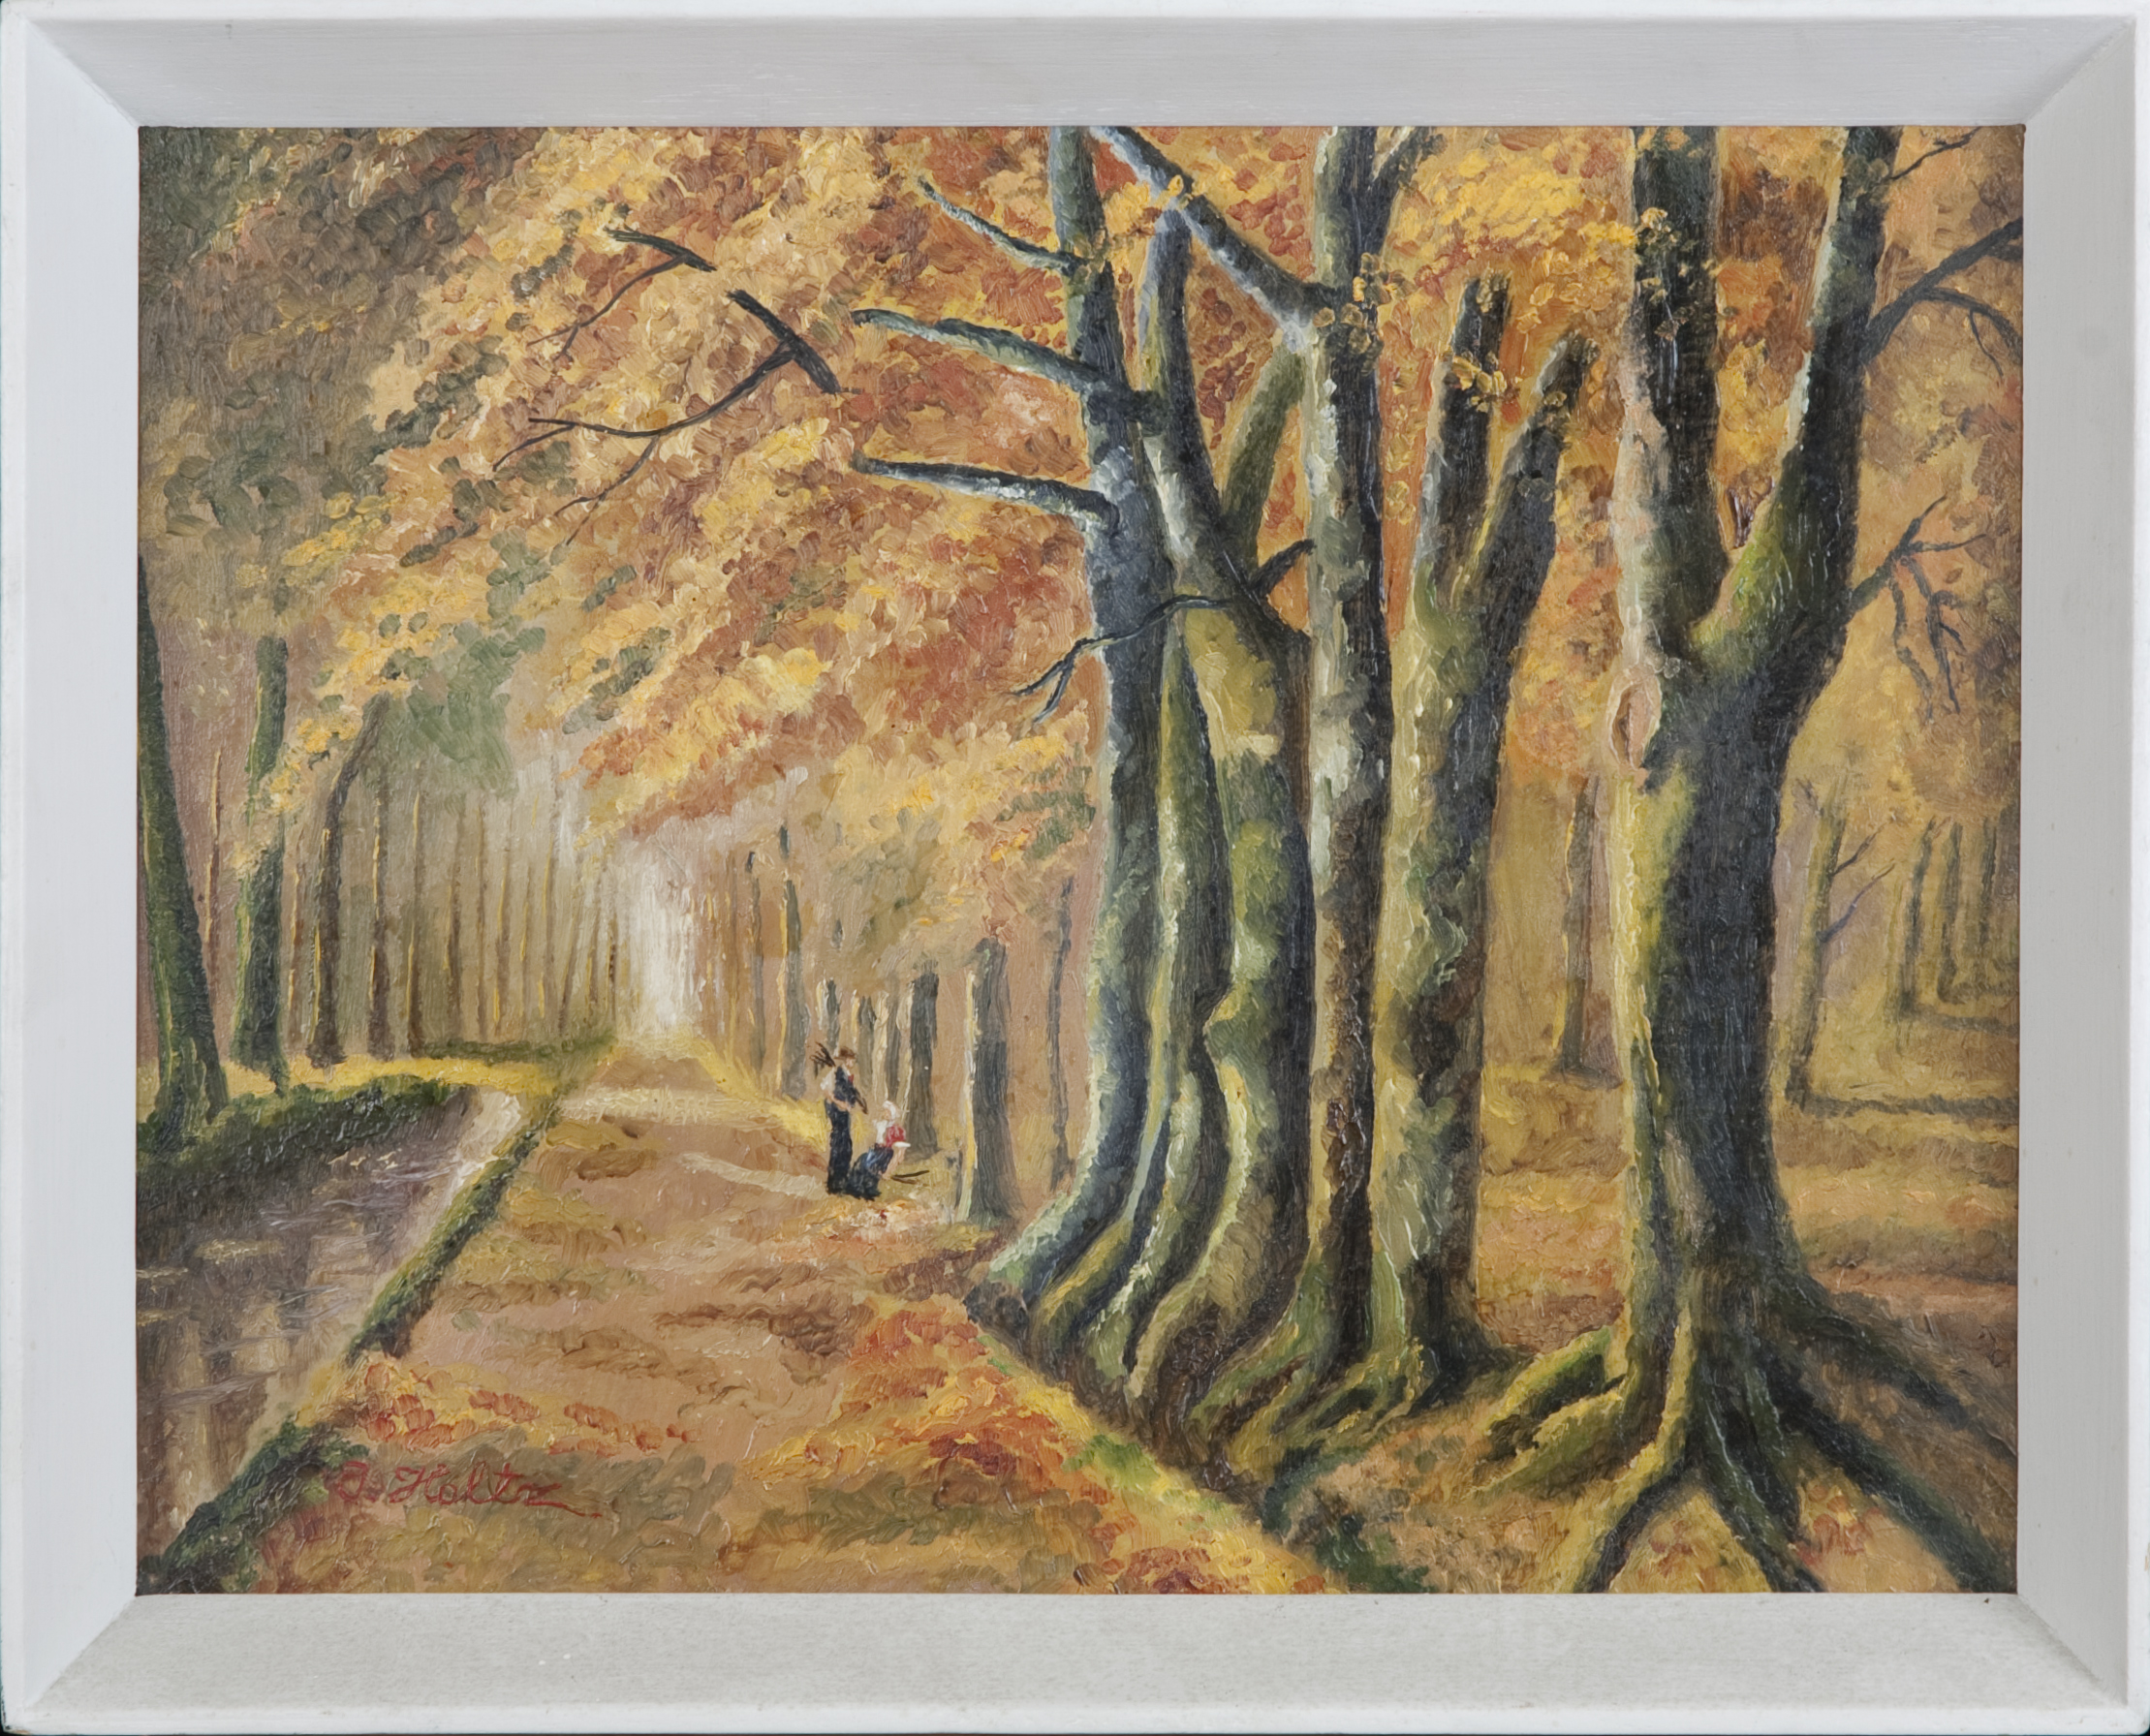 206 Country Road in Autumn 1944 - Oil on board - 14 x 11 - Frame: 15.5 x 12.5 x 1.75